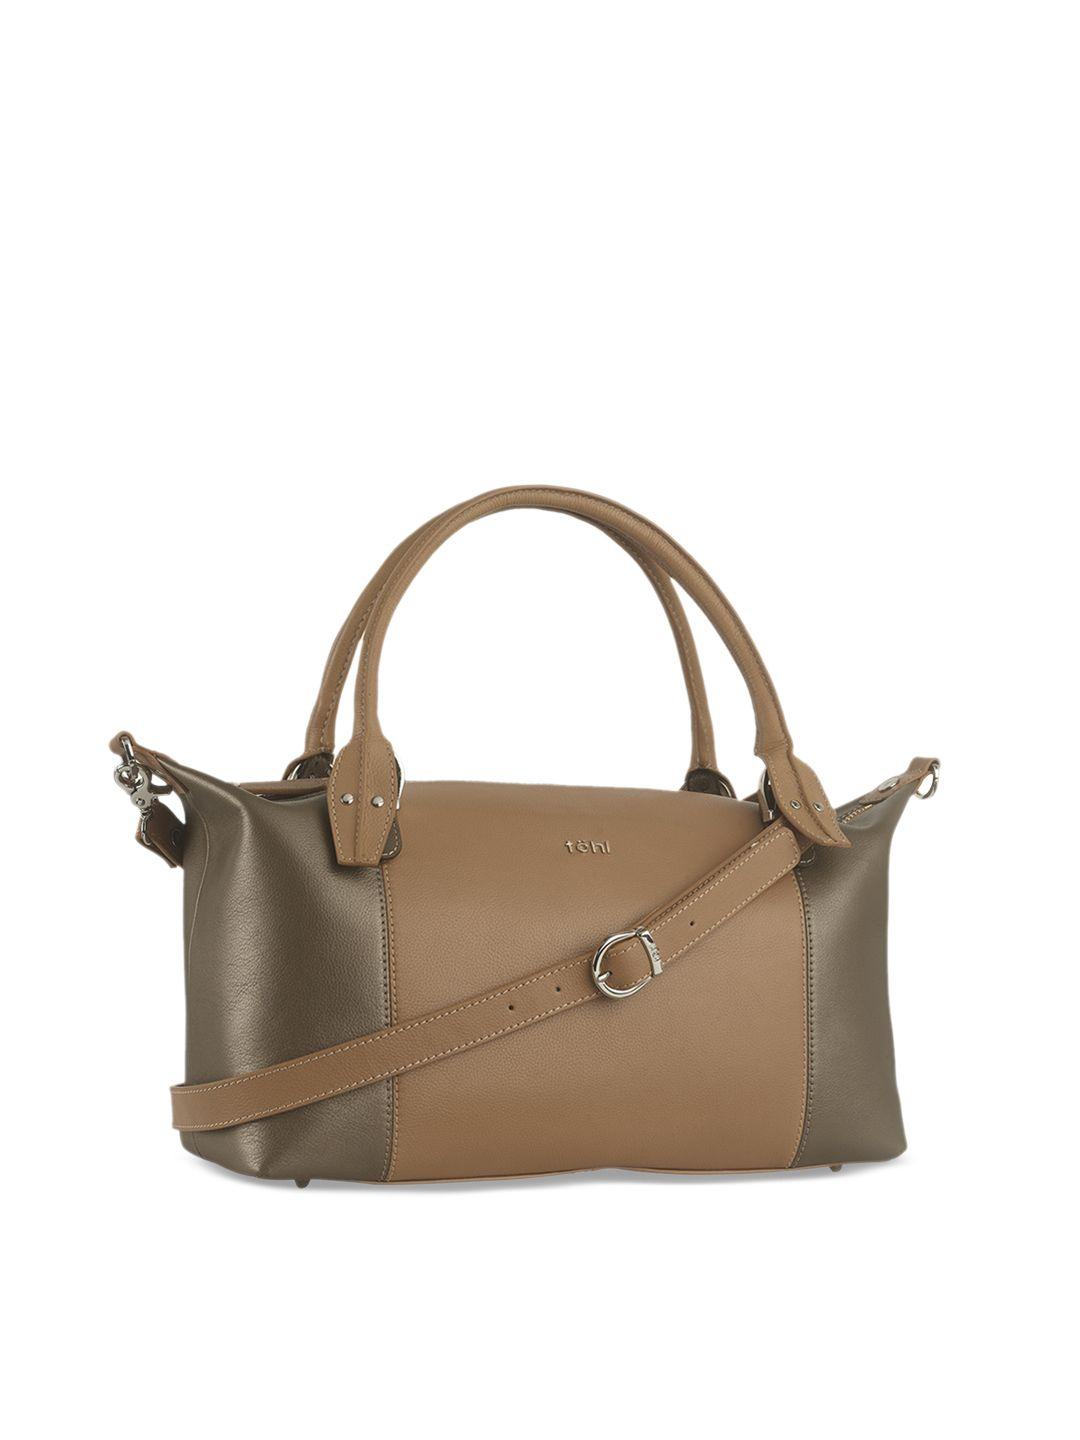 tohl brown colourblocked leather handheld bag